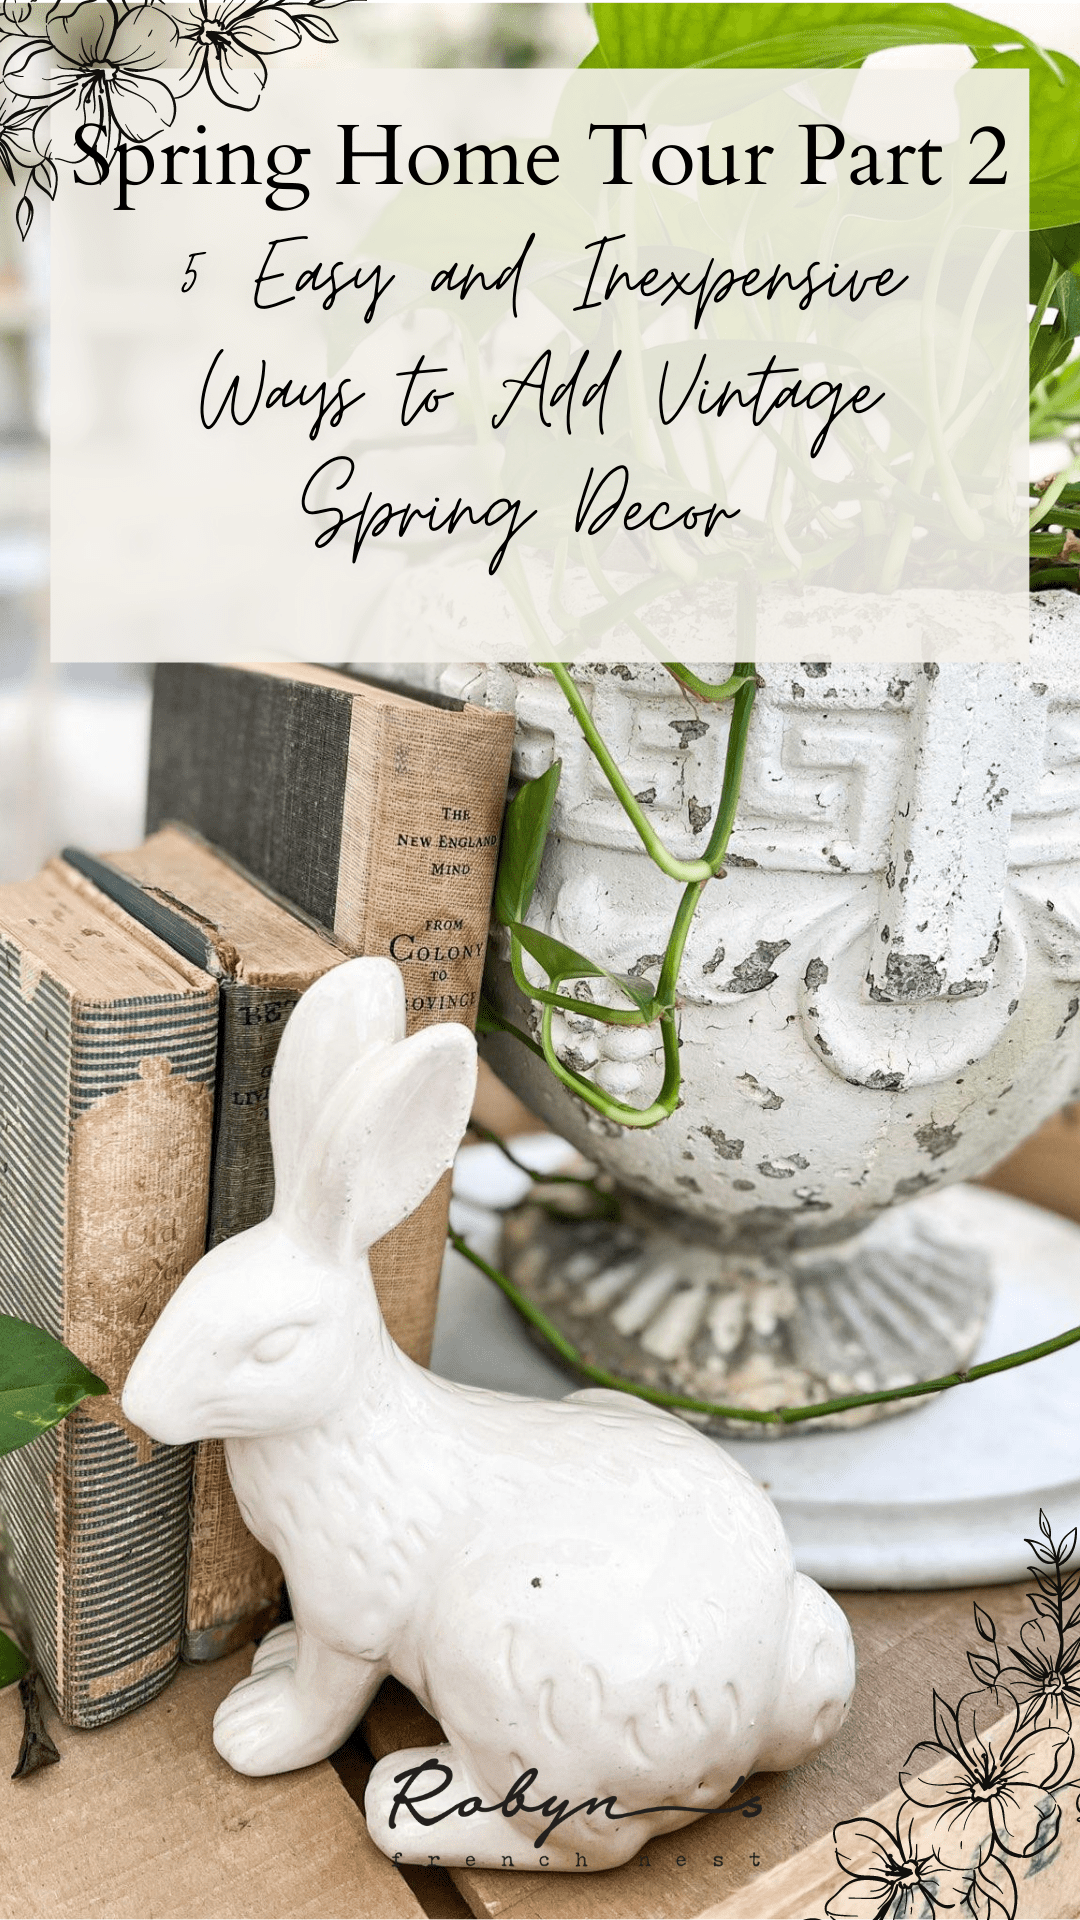 5 Easy and Inexpensive Ways to Add Vintage Spring Decor